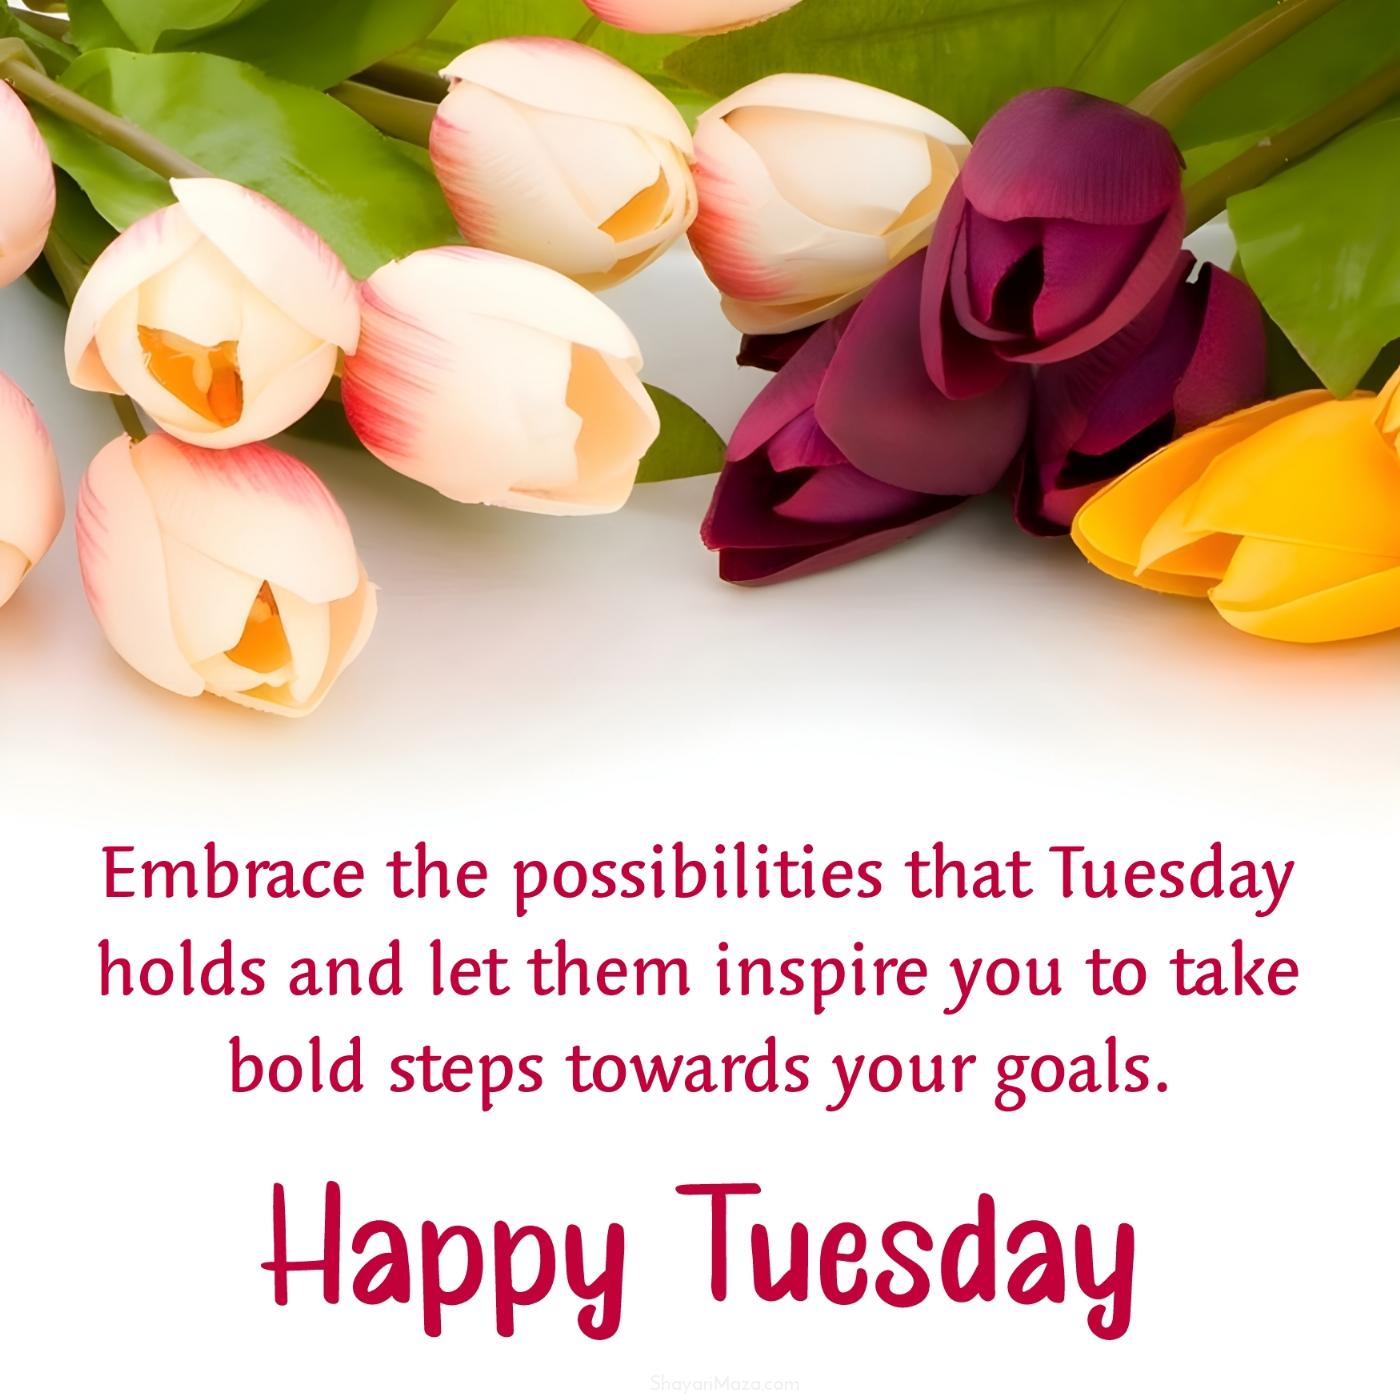 Embrace the possibilities that Tuesday holds and let them inspire you